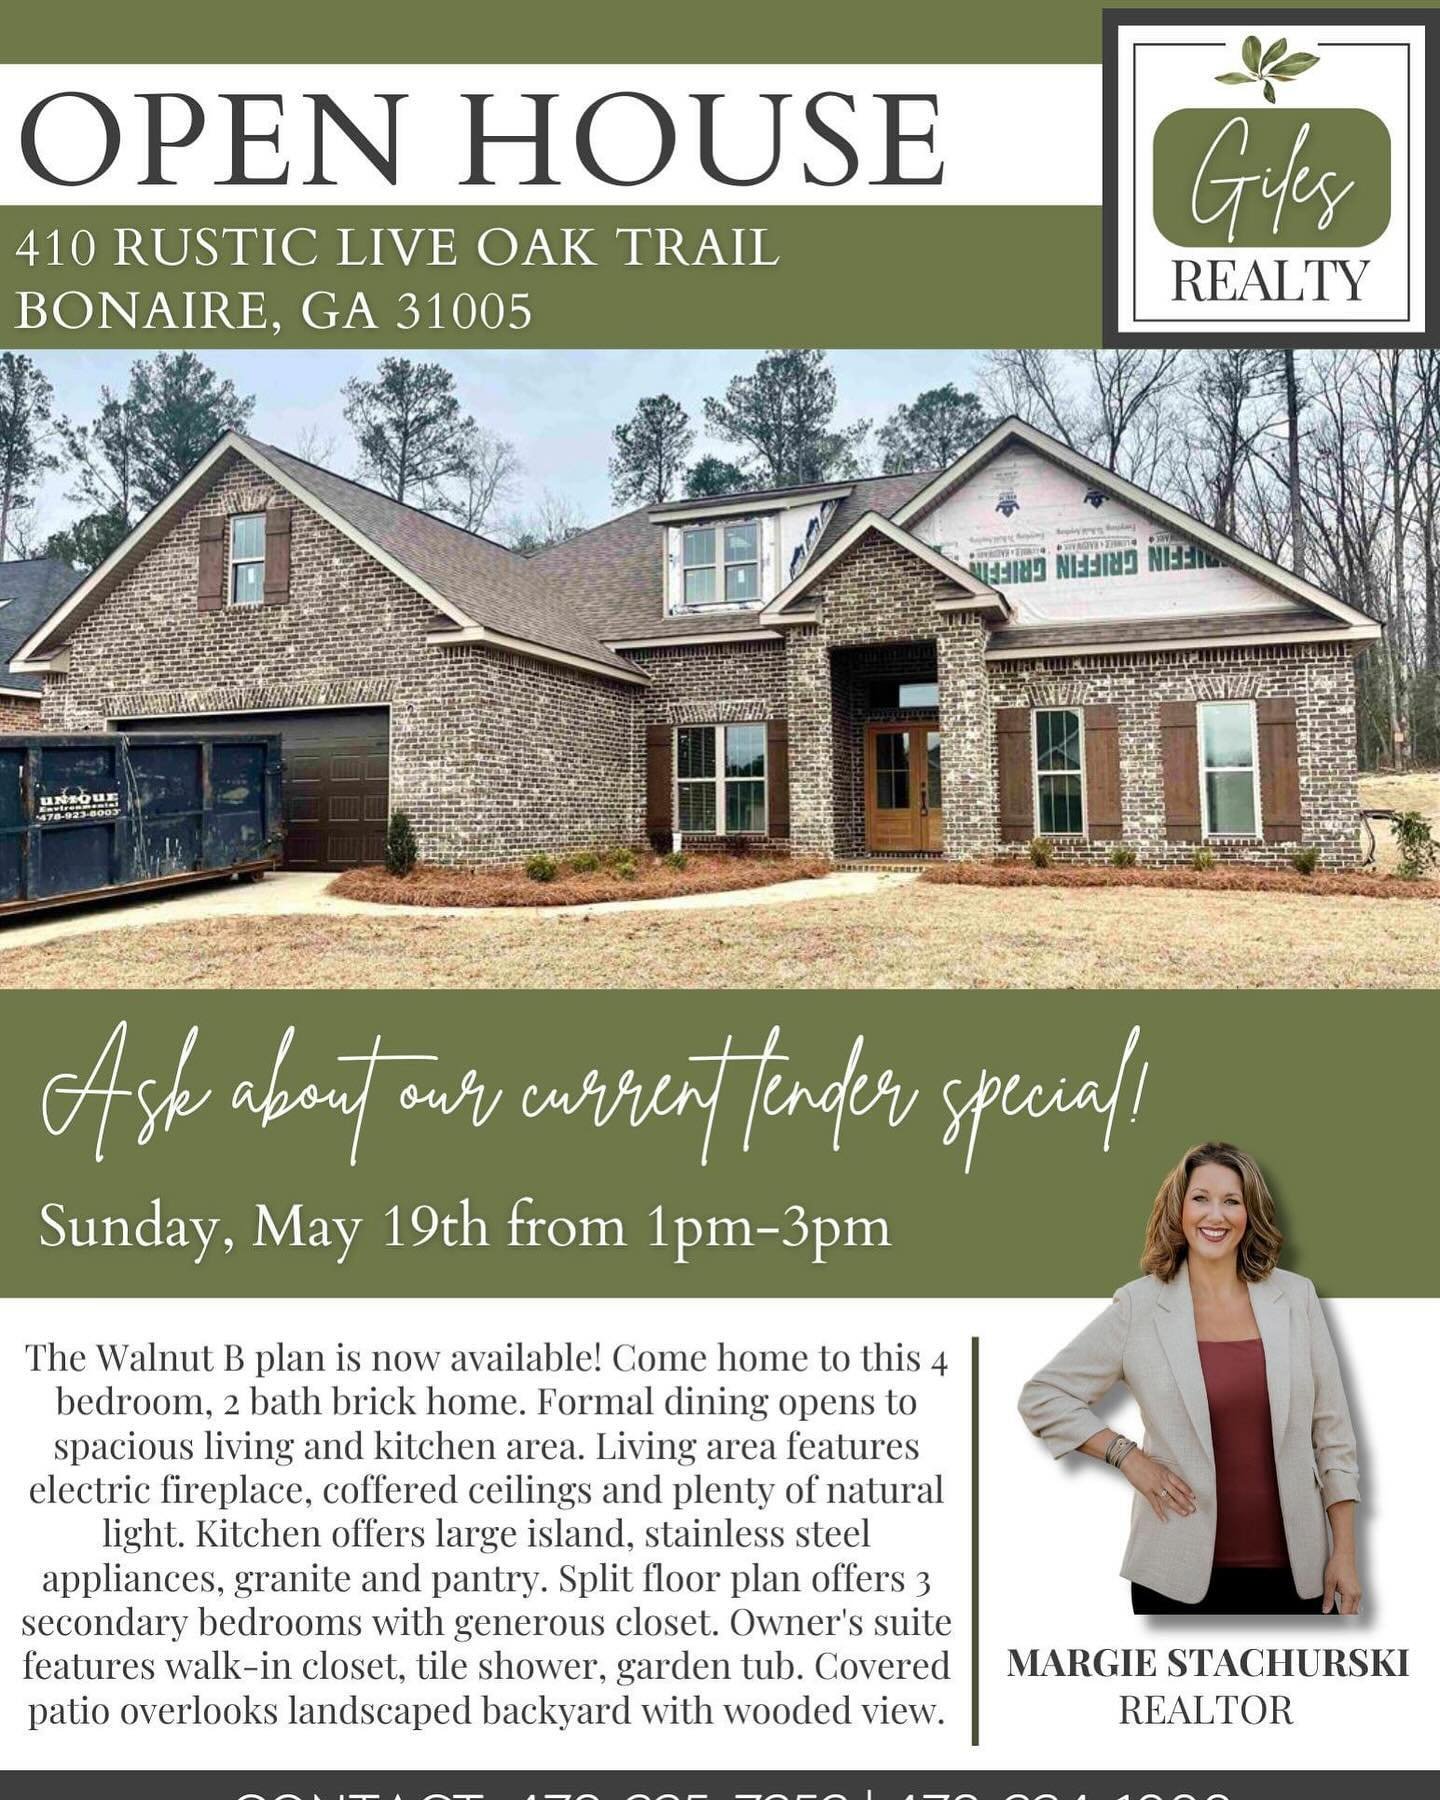 💚 Open Sunday! 💚

410 Rustic Live Oak Trail, Bonaire, GA 31005
Sunday, May 19th from 1-3pm

Directions: From SR 96 E turn right onto County Rd, turn right onto Old Perry Rd. Then turn left onto Rustic Live Oak Trail. Follow back to new phase. The h